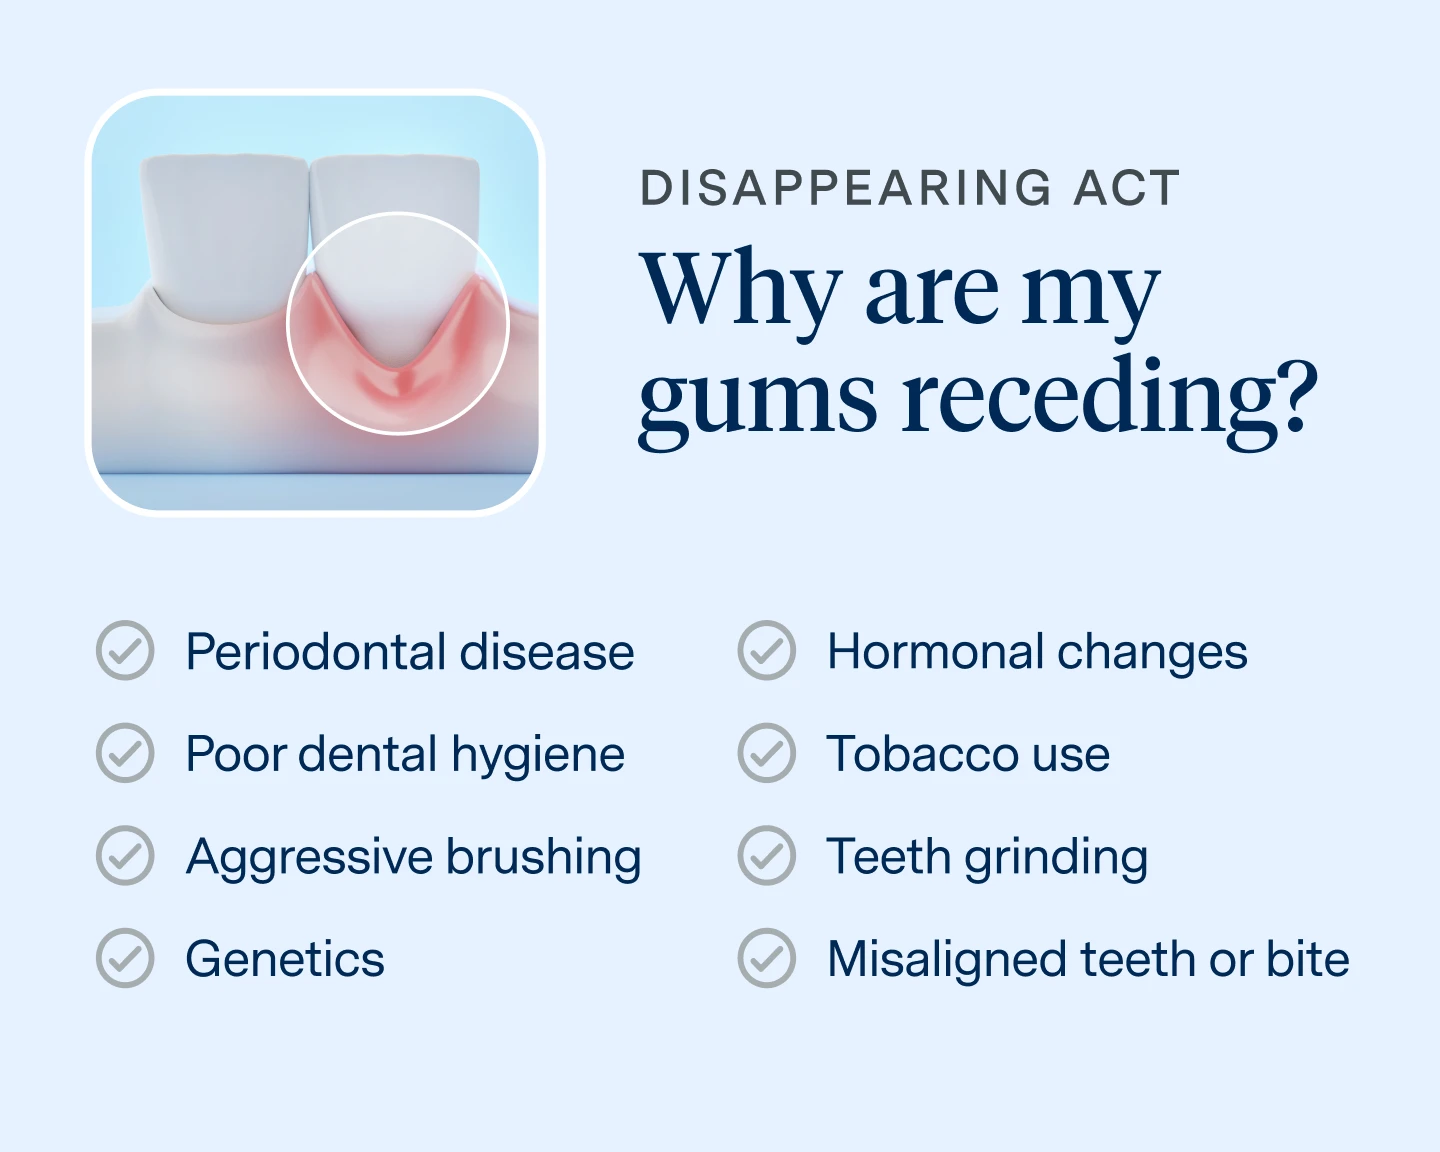 Why are my gums receding?
Periodontal disease
Poor dental hygiene
Aggressive brushing
Genetics
Hormonal changes
Use of tobacco products
Teeth grinding or bruxism
Misaligned teeth or bite